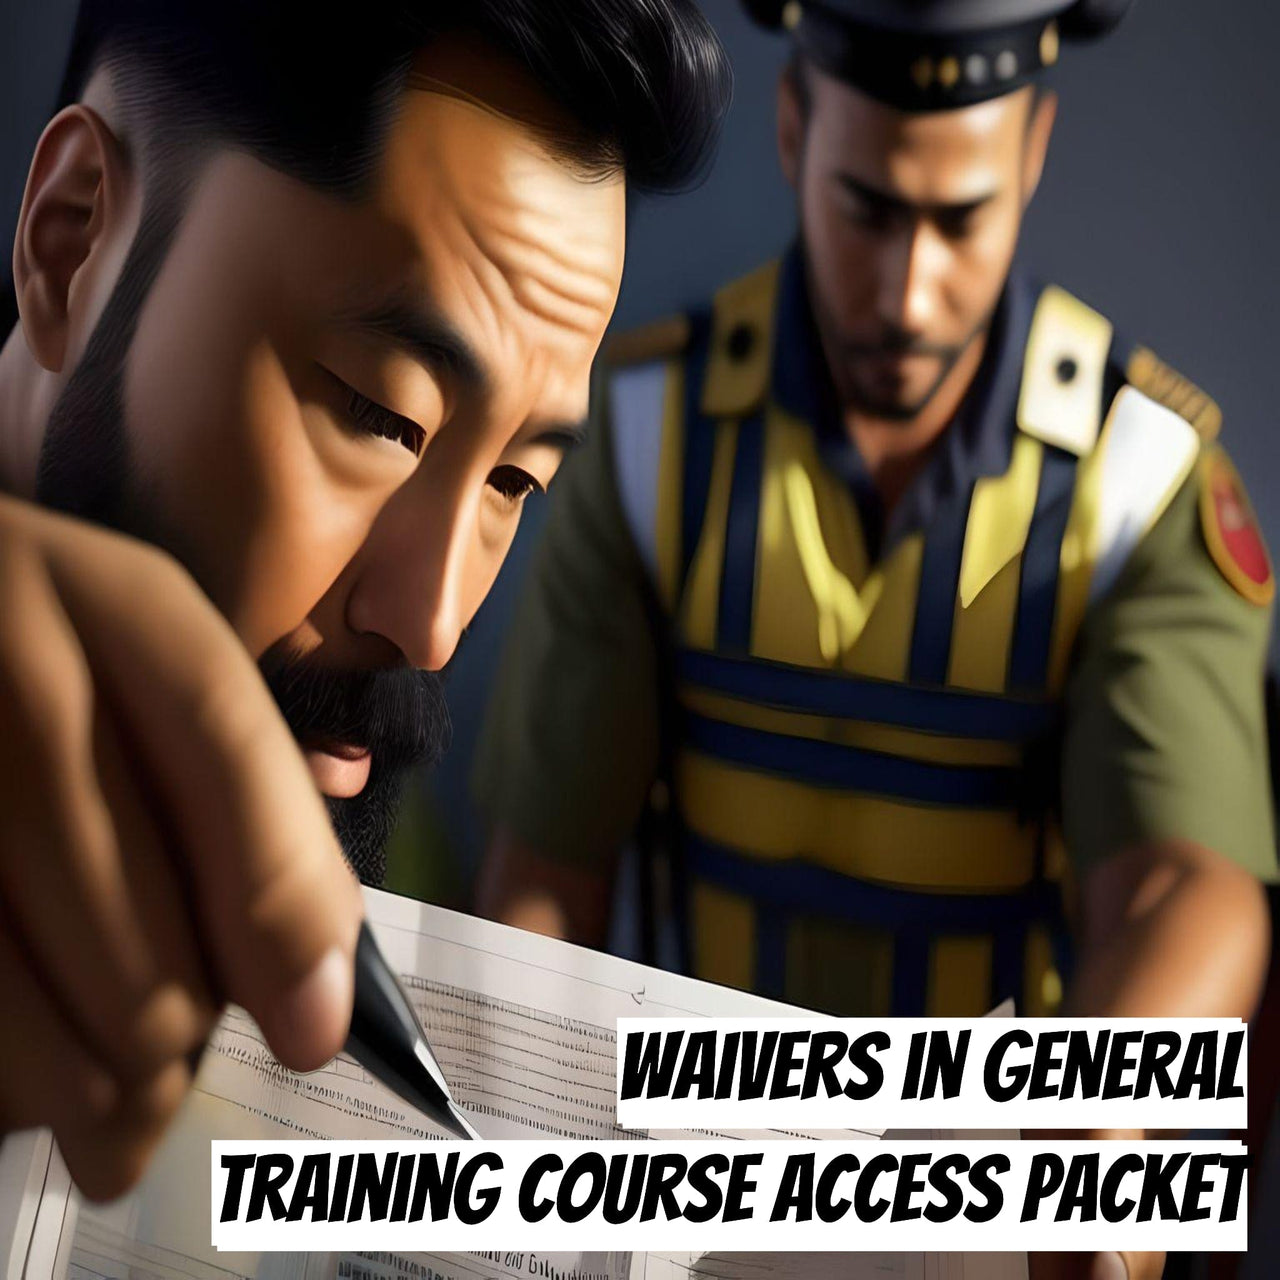 Rocket Immigration Petitions Immigration Visa Waivers in General Training Course Access Packet